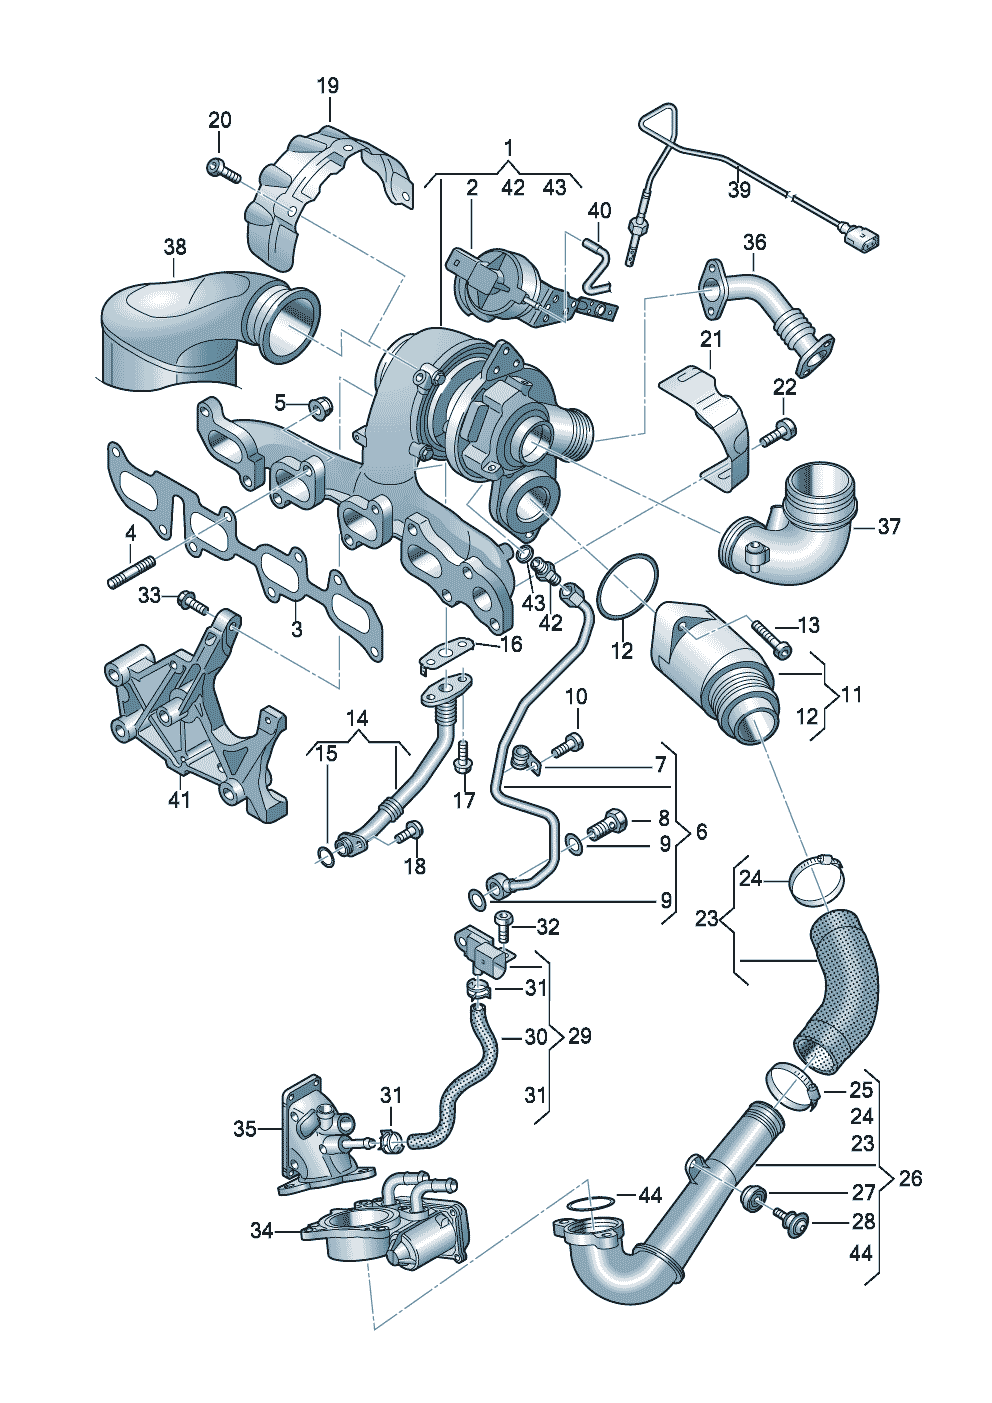 Exhaust manifold with turbo-<br>charger 2.0 Ltr. - Audi A3/S3/Sportb./Lim./qu. - a3